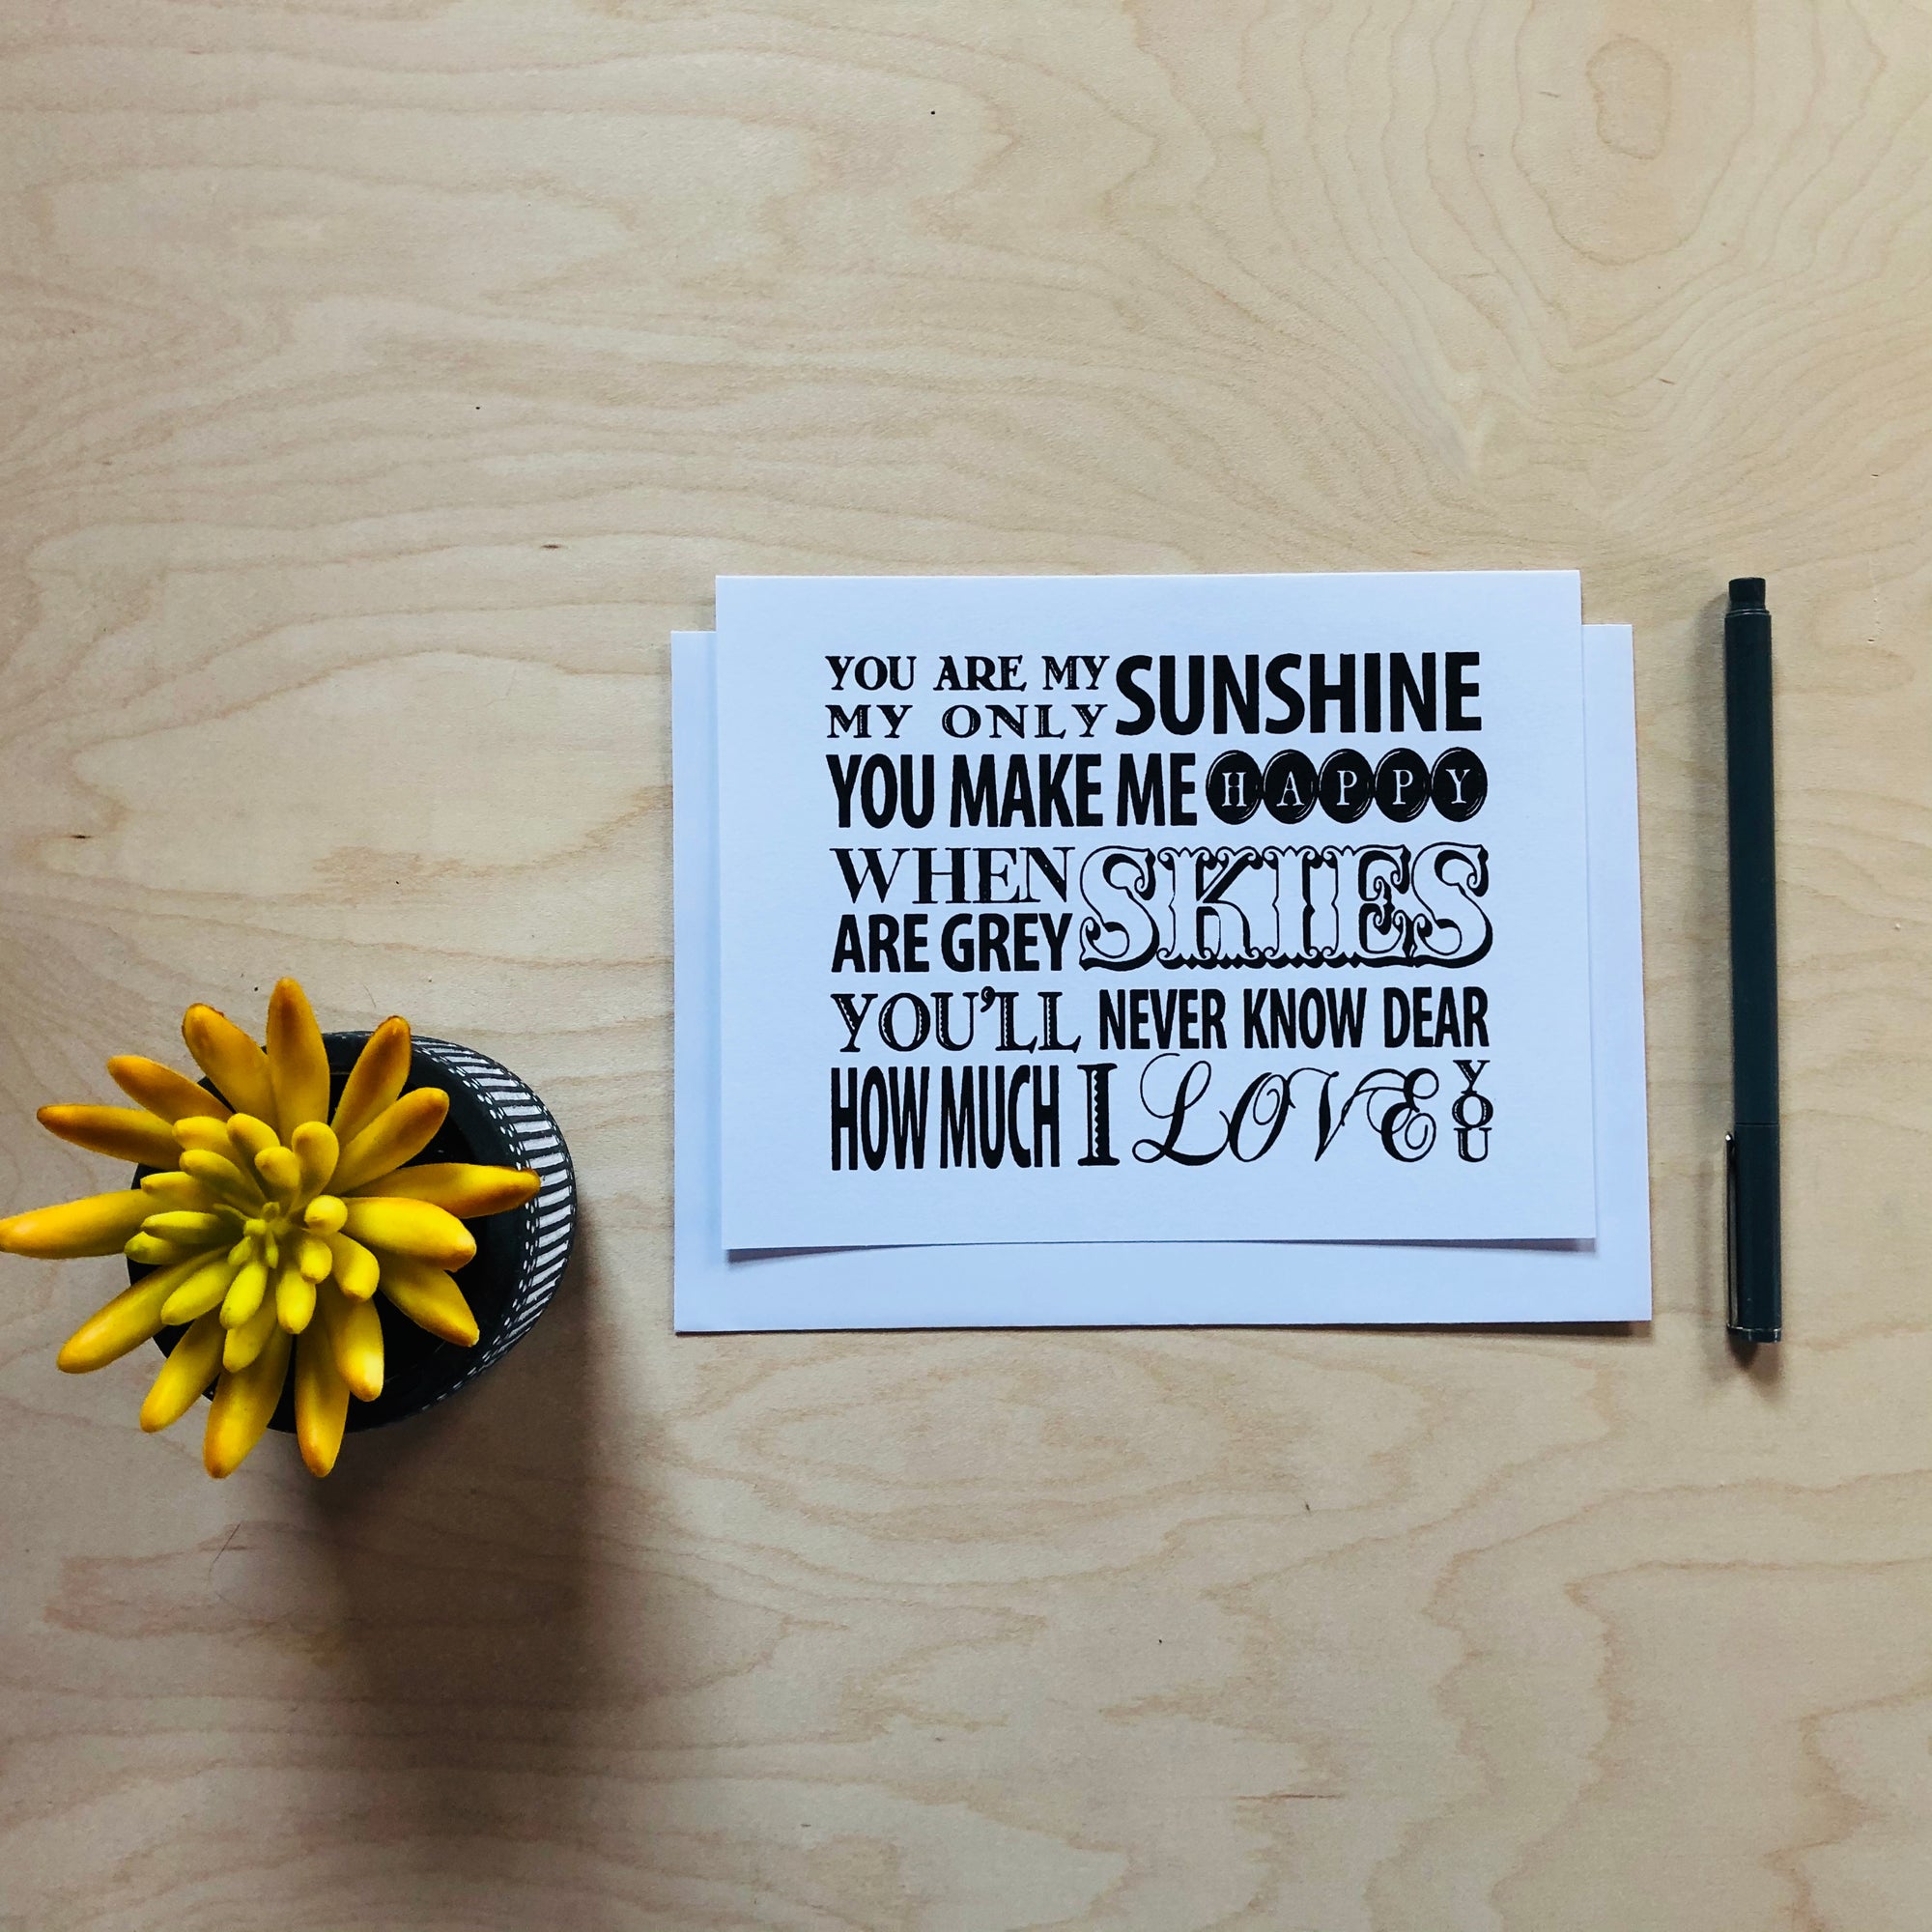 “You are my sunshine” greeting card